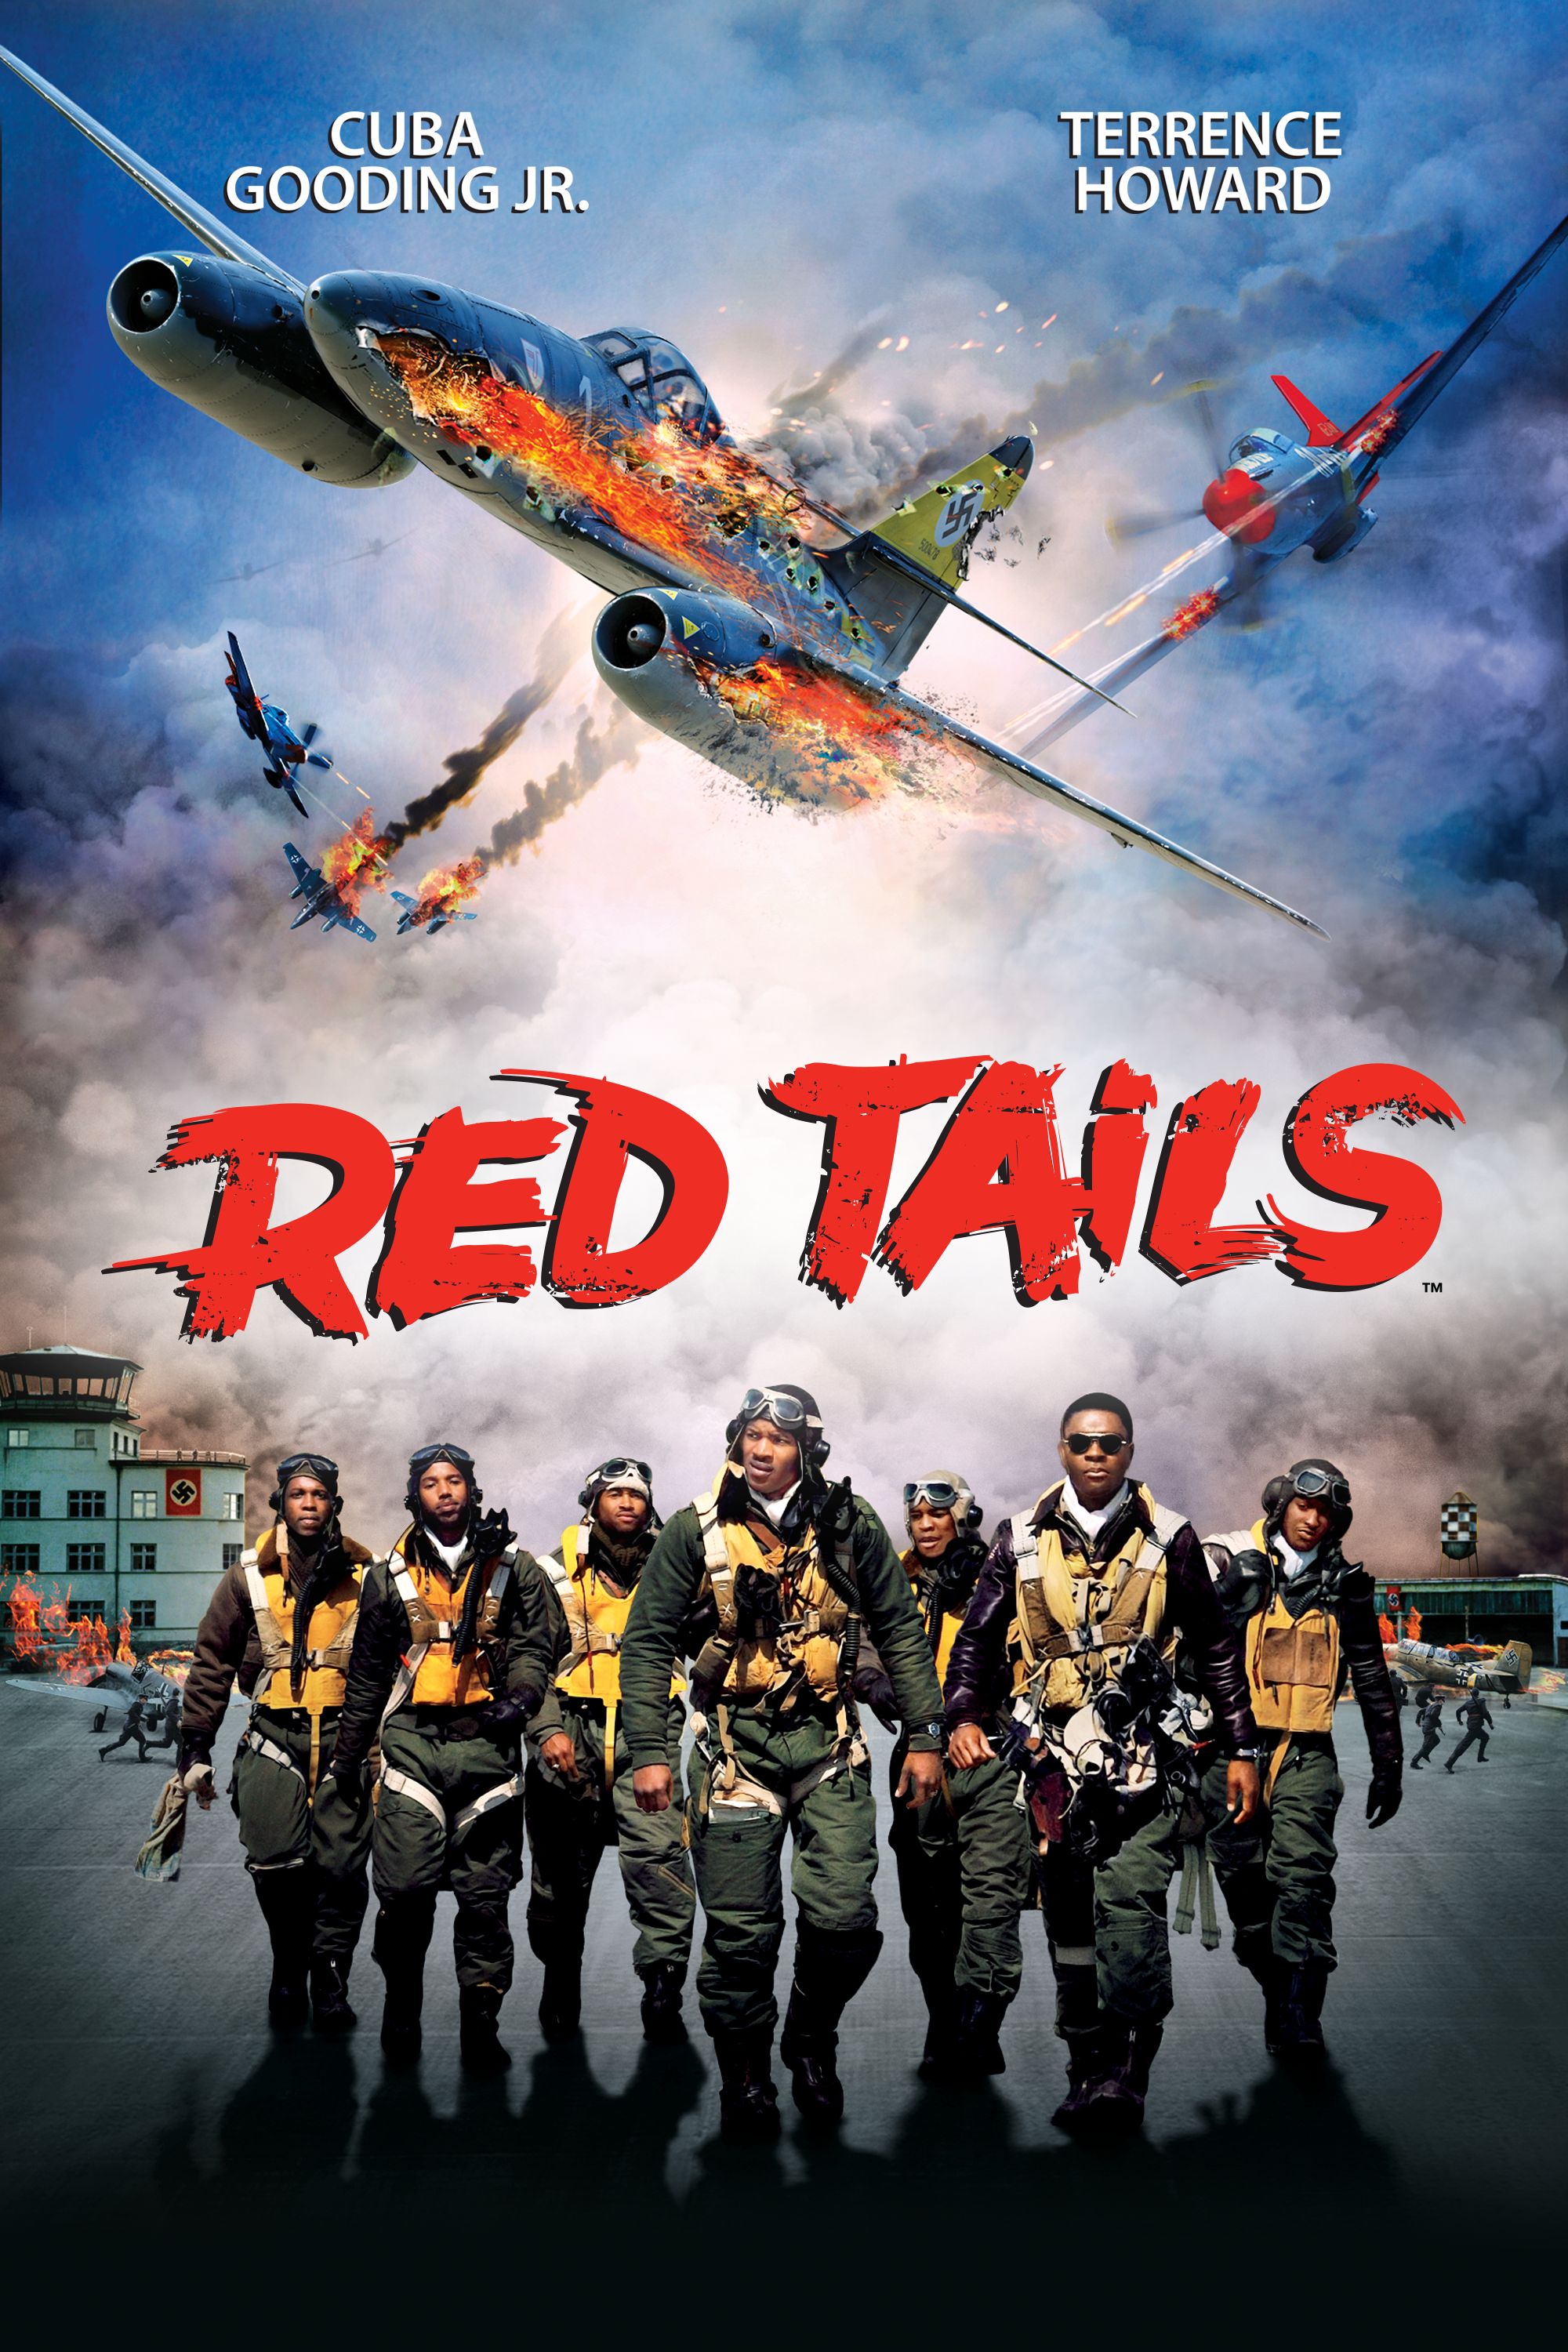 RED TAILS TUSKEGEE AIRMEN GEORGE LUCAS CUBA GOODING JR LABOR DAY FR WW2 WAR ARMY 